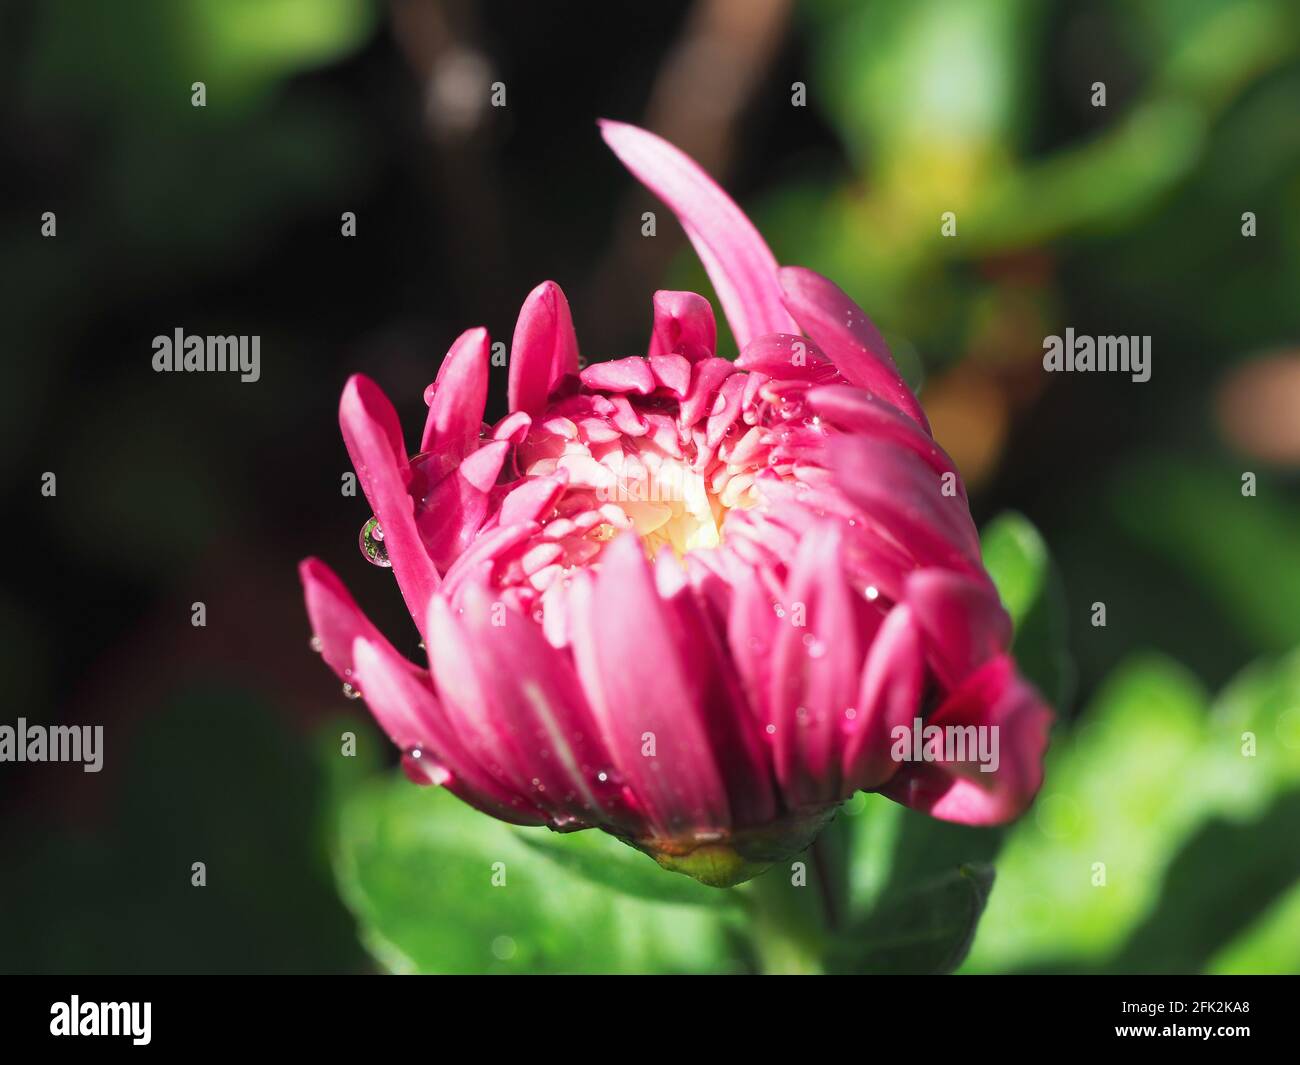 Fresh and wet, closeup of a magenta pink Chrysanthemum or mum  flower opening in the sunshine in the garden Stock Photo